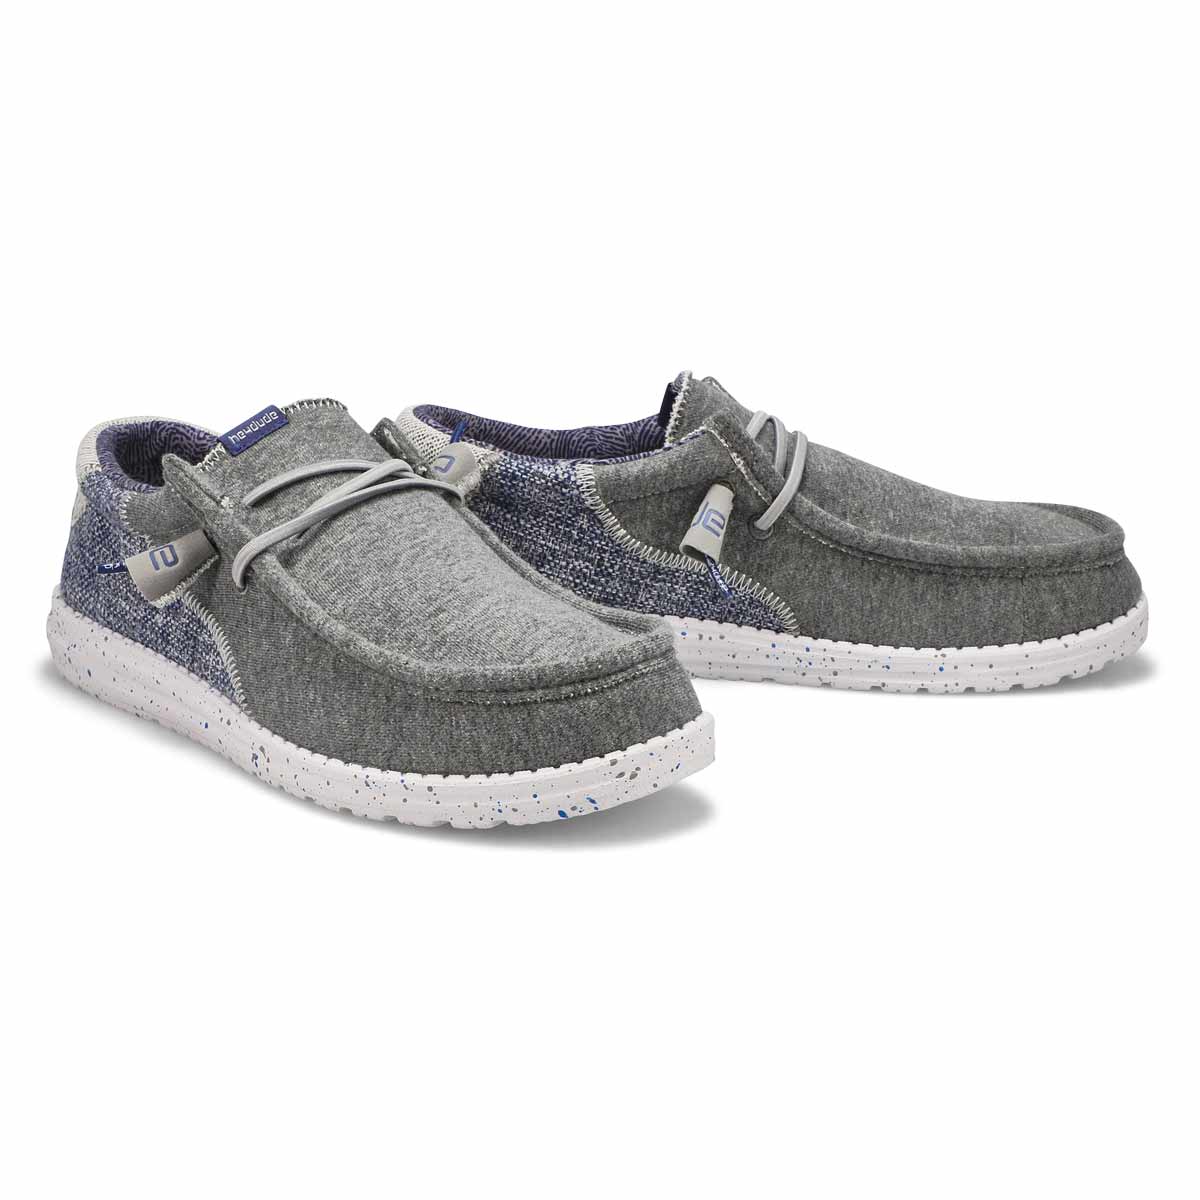 Men's Wally Stitch Casual Shoe - Eve Cruise